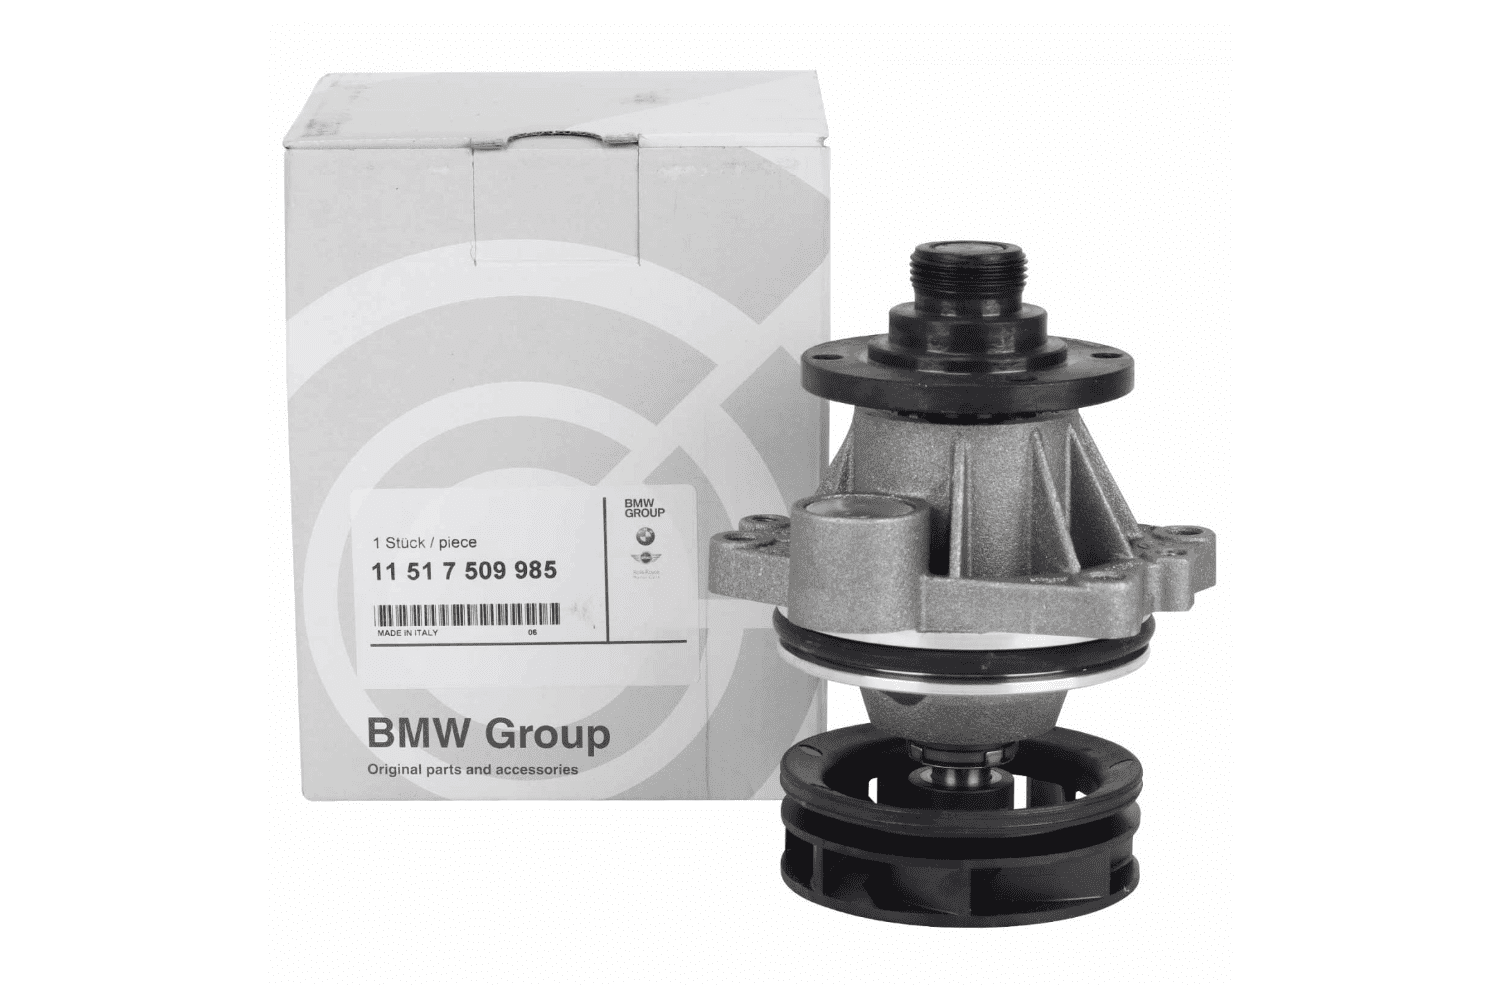 BMW water pump failure explained